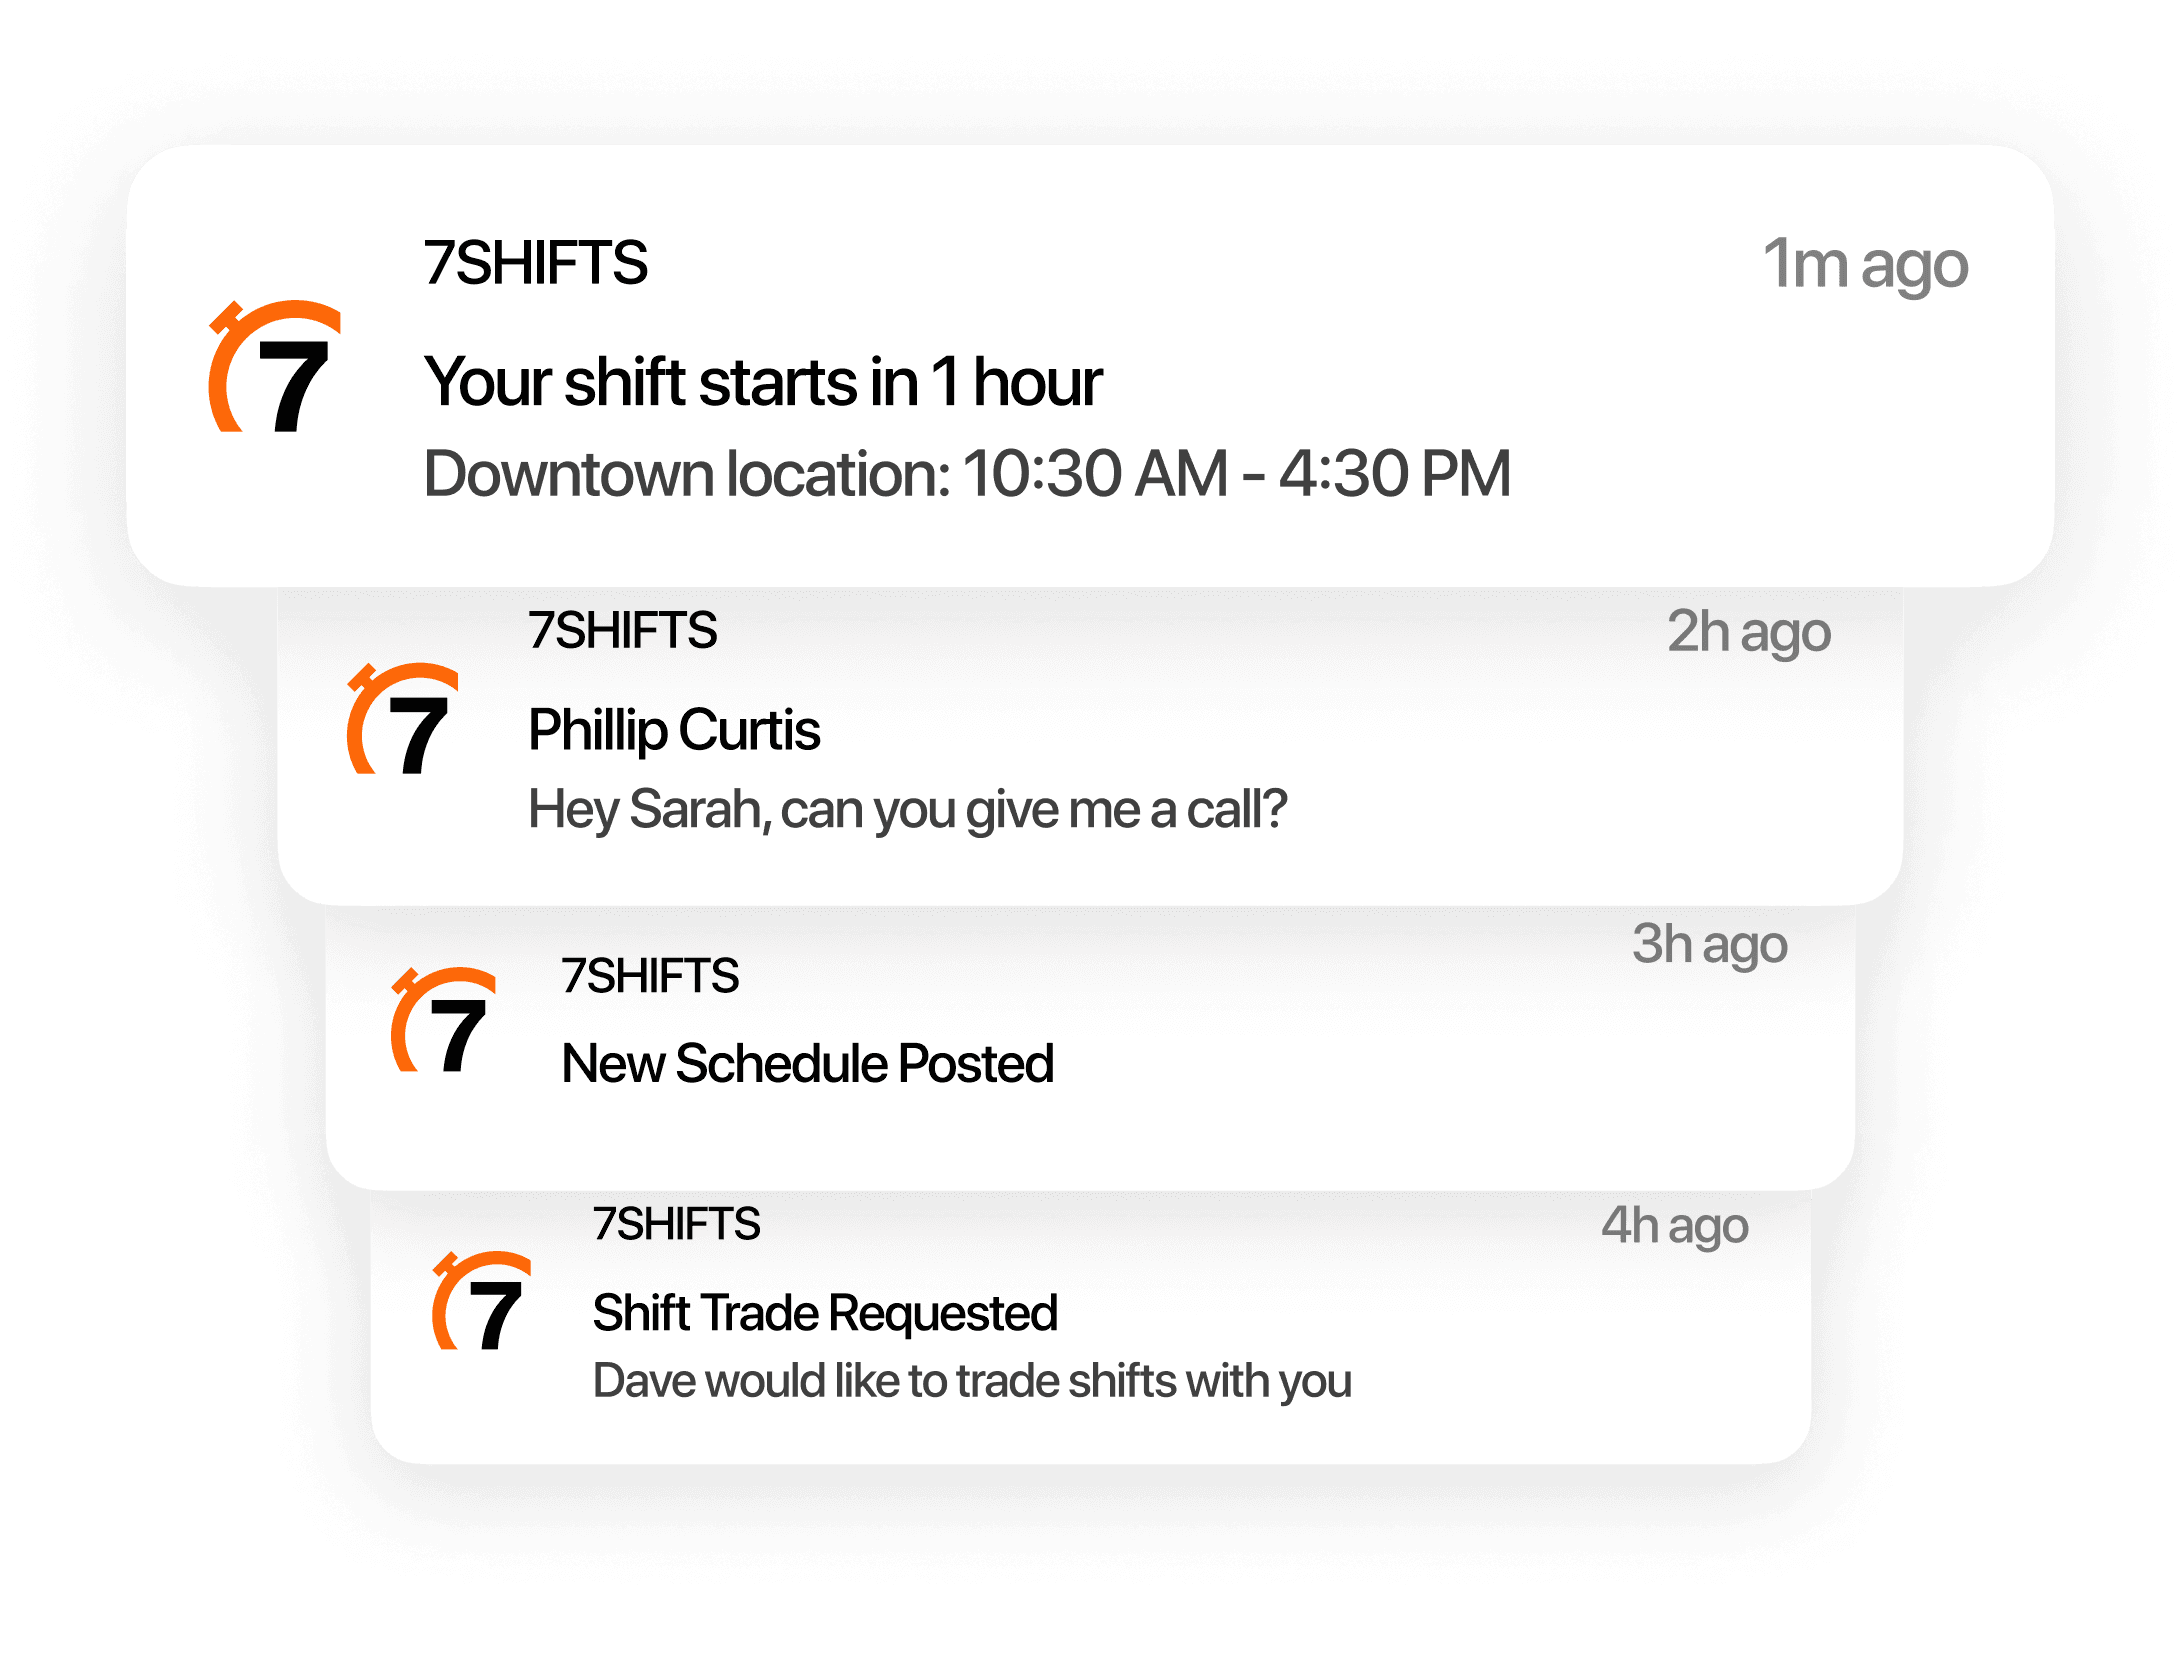 7shifts mobile app notifications for restaurant employees